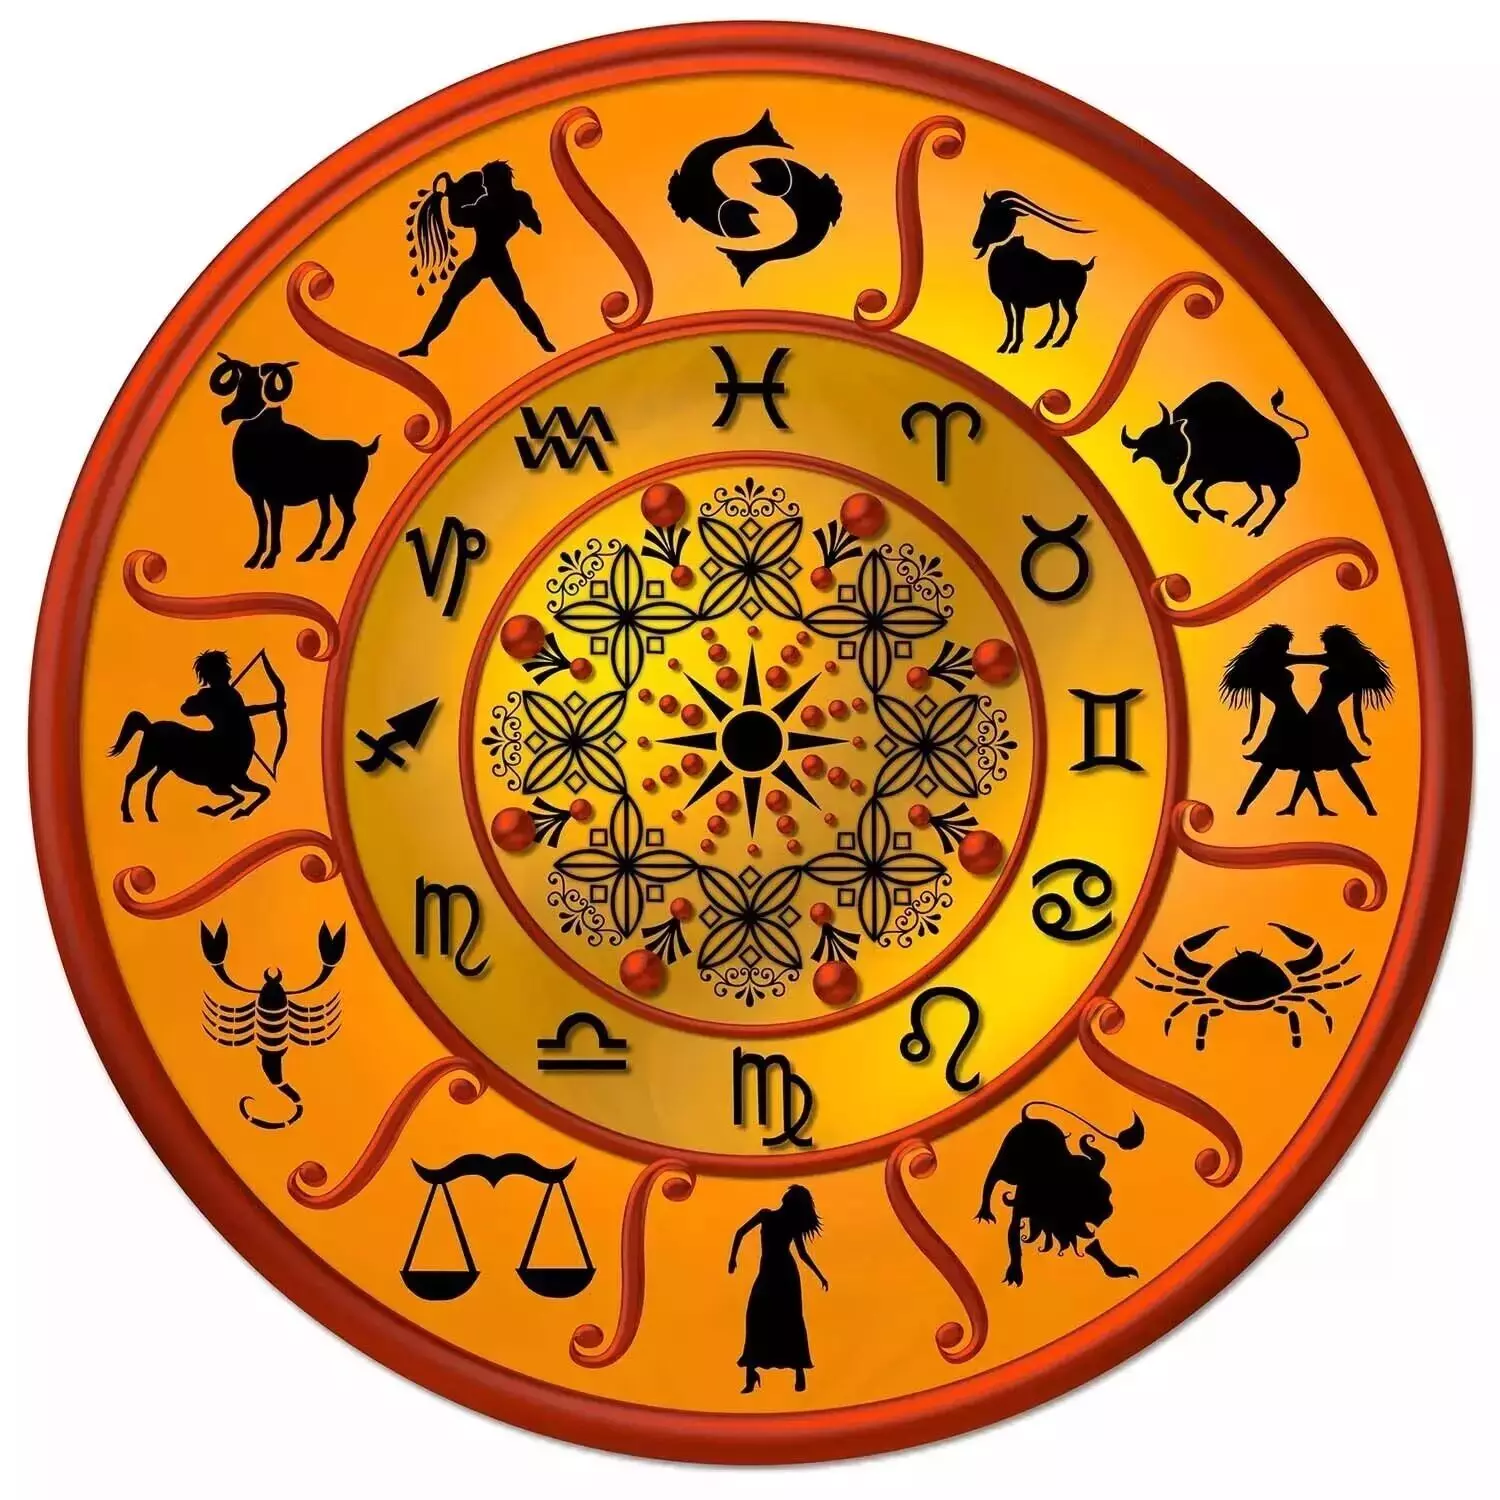 04 July  – Know your todays horoscope